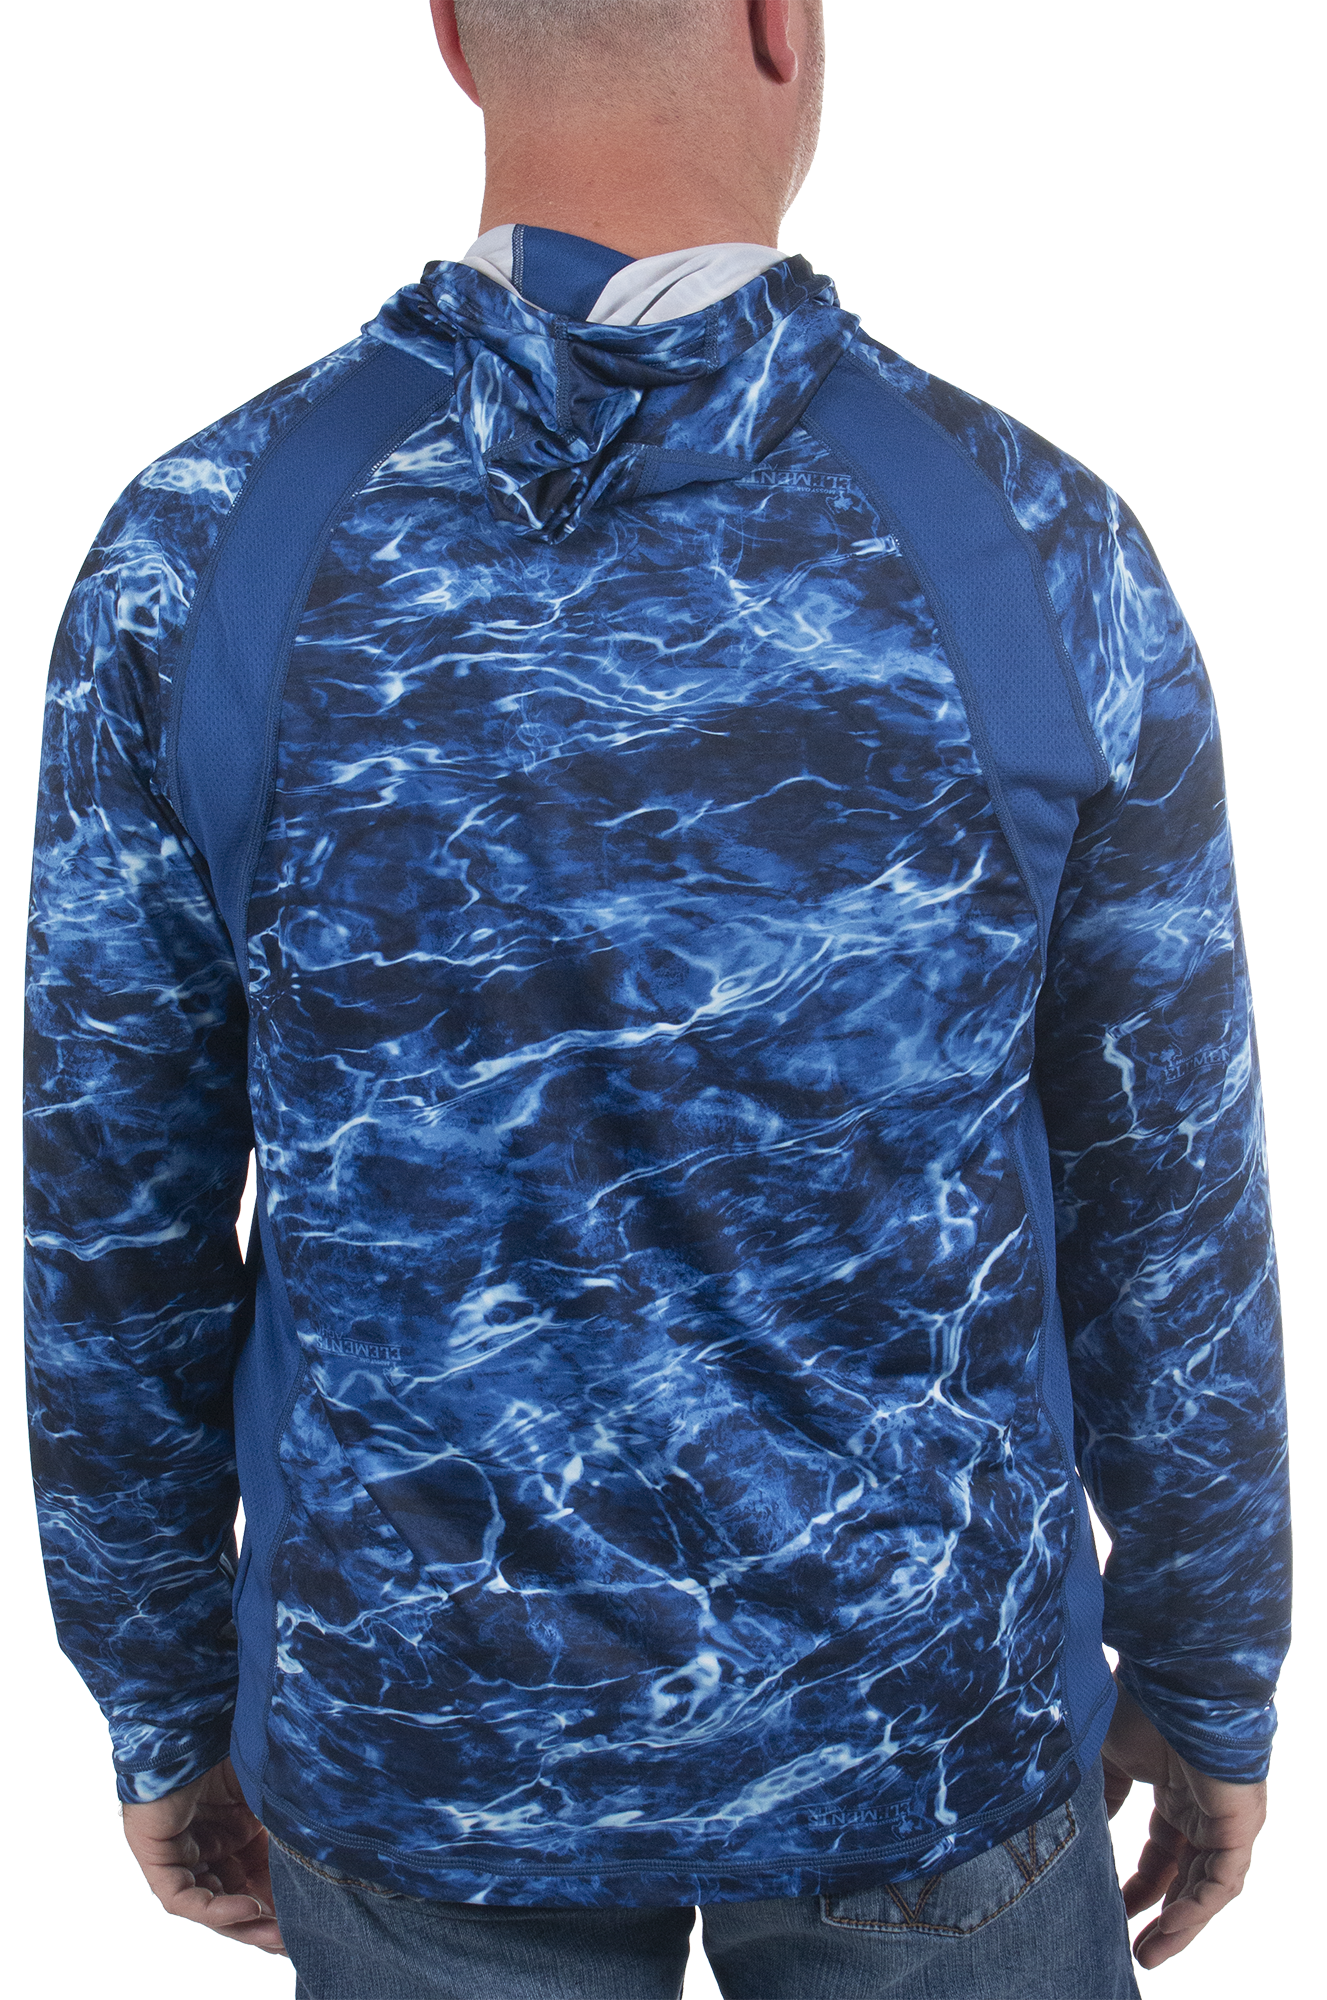 MLF Men's Camo Hooded Performance Layer with Gaiter Agua Blue Back